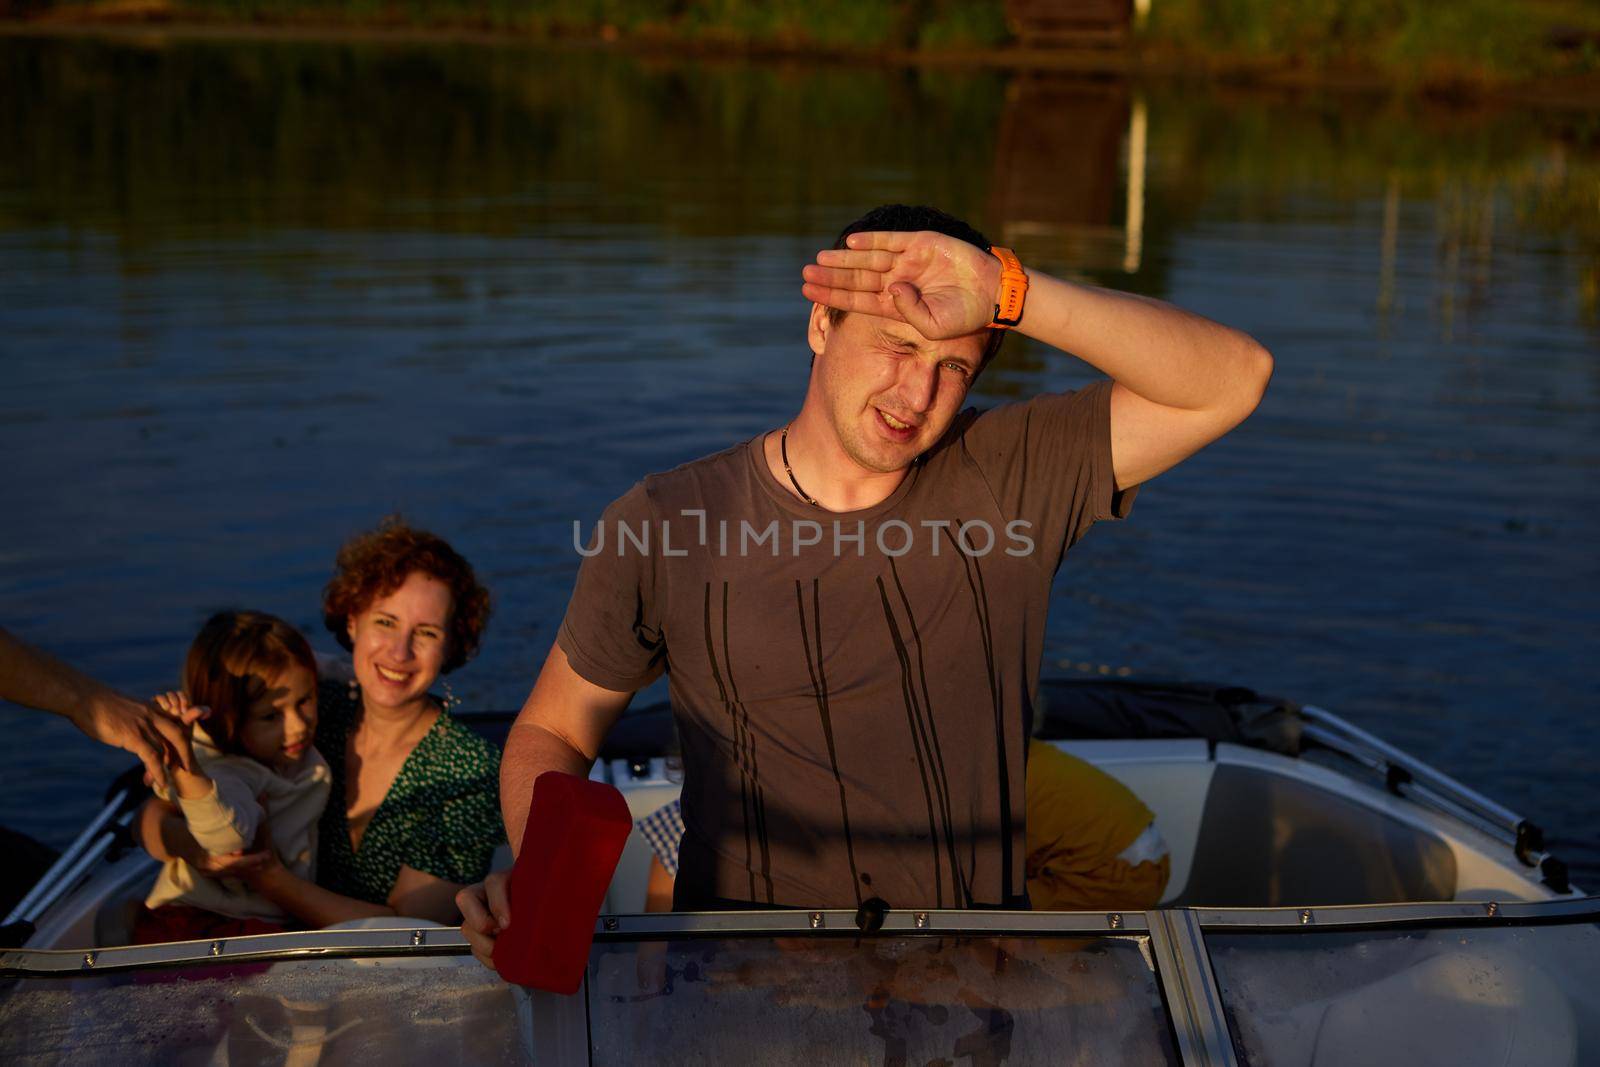 Man steering boat with family day on lake by Demkat